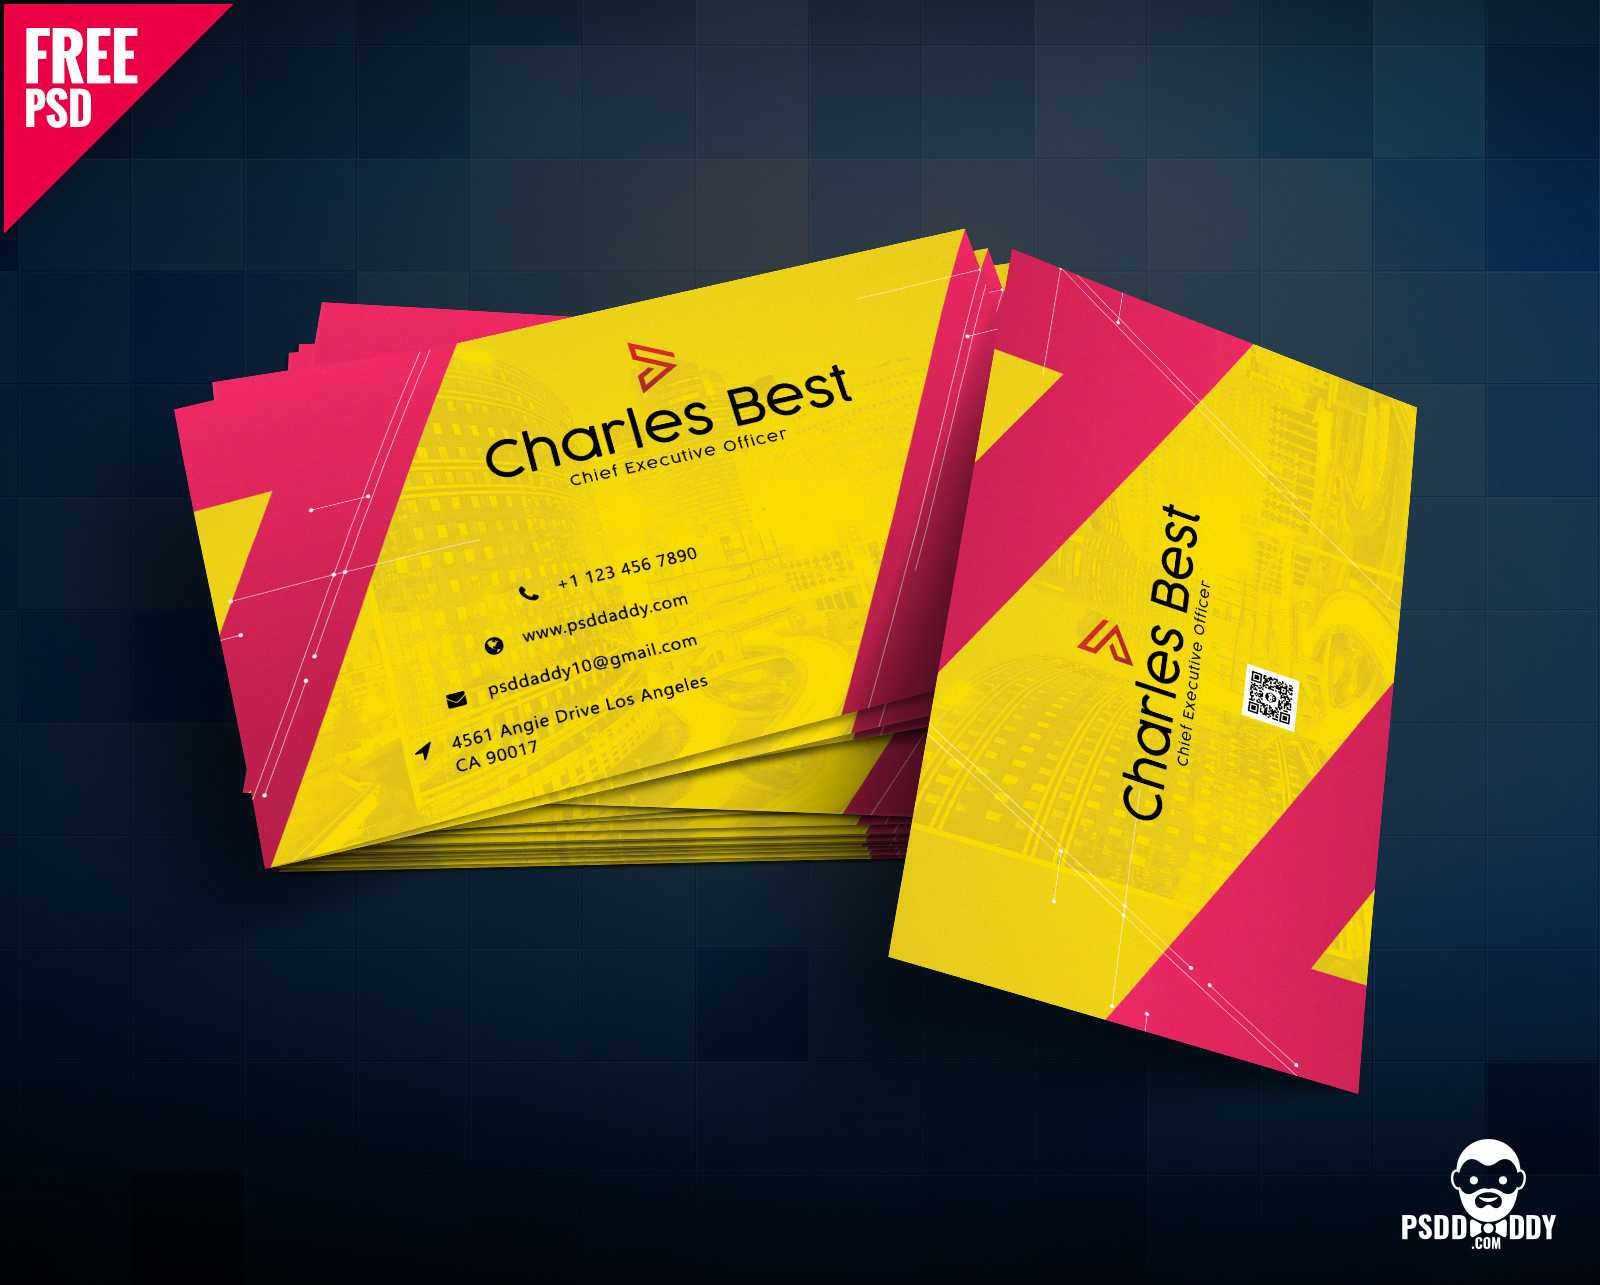 Download] Creative Business Card Free Psd | Psddaddy Intended For Free Templates For Cards Print